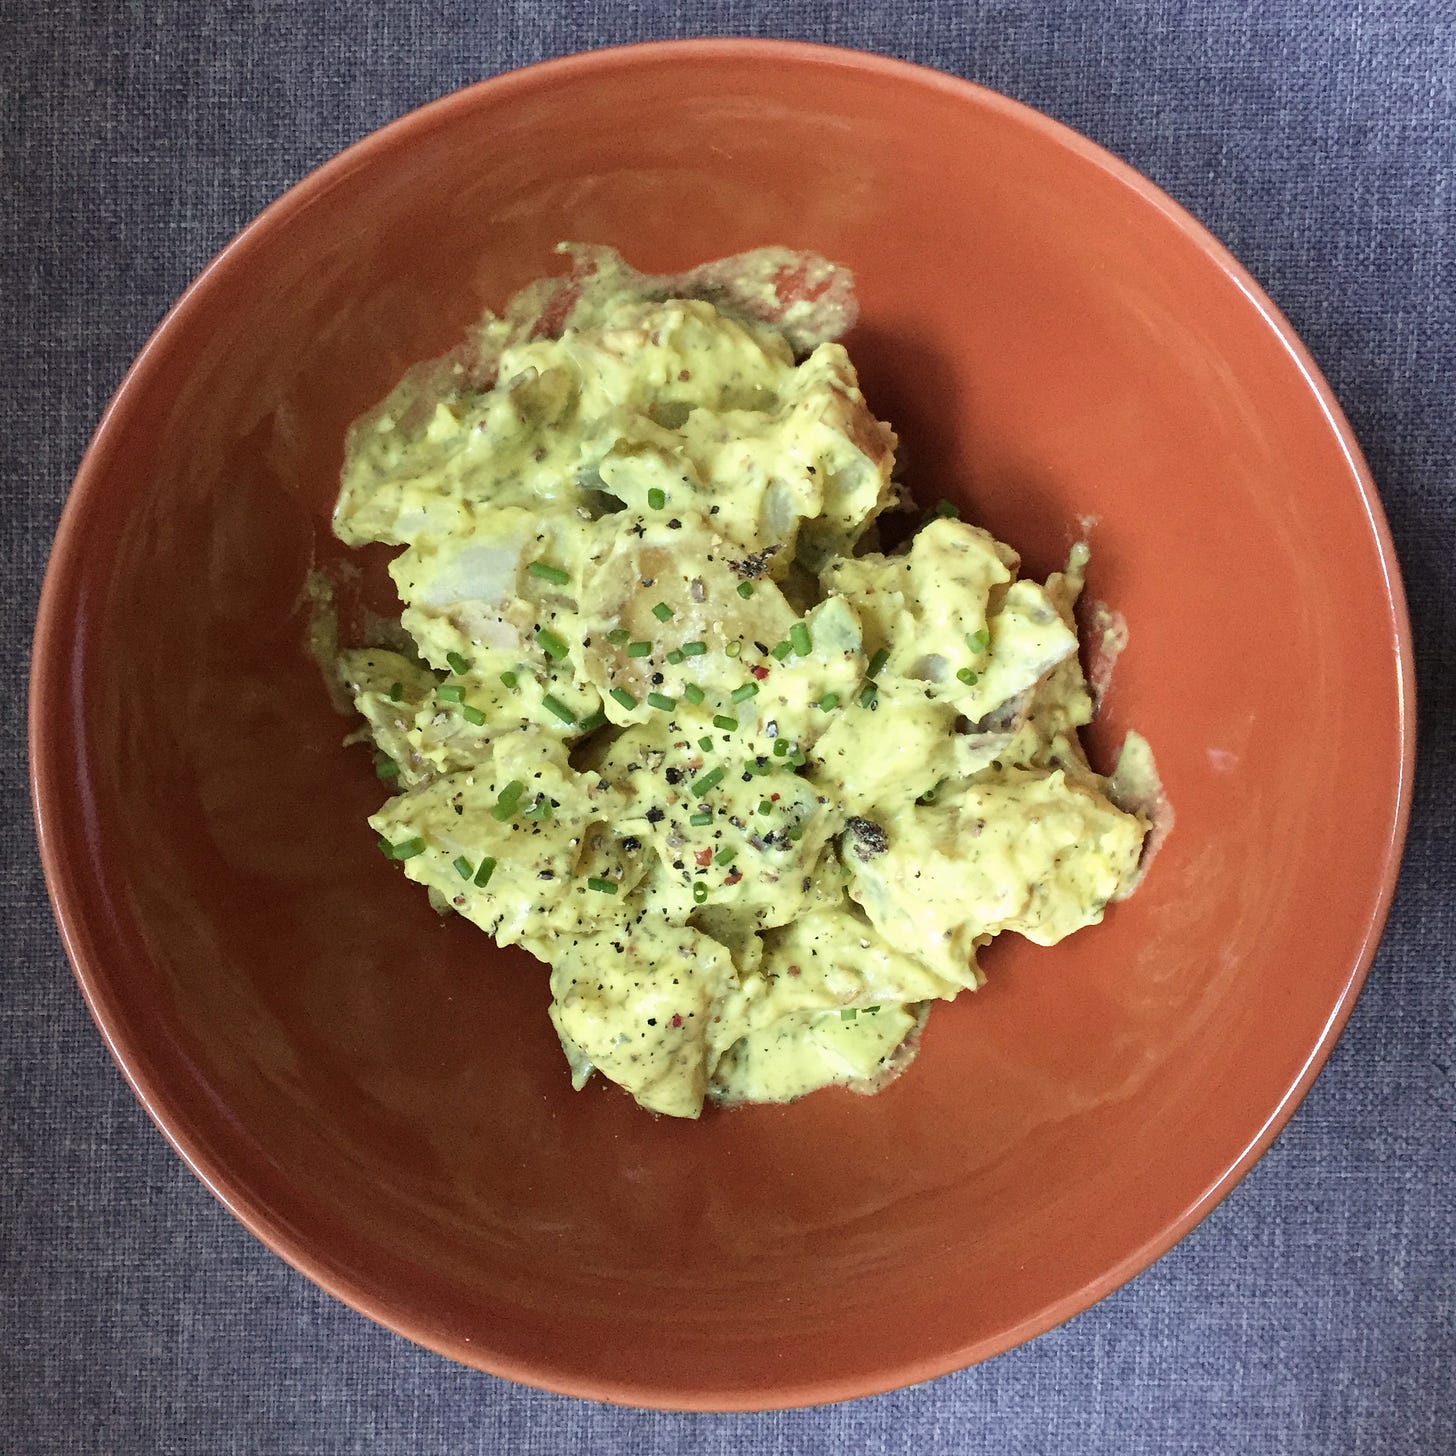 an orange bowl of yellowy potato salad, topped with minced chives and ground pepper.